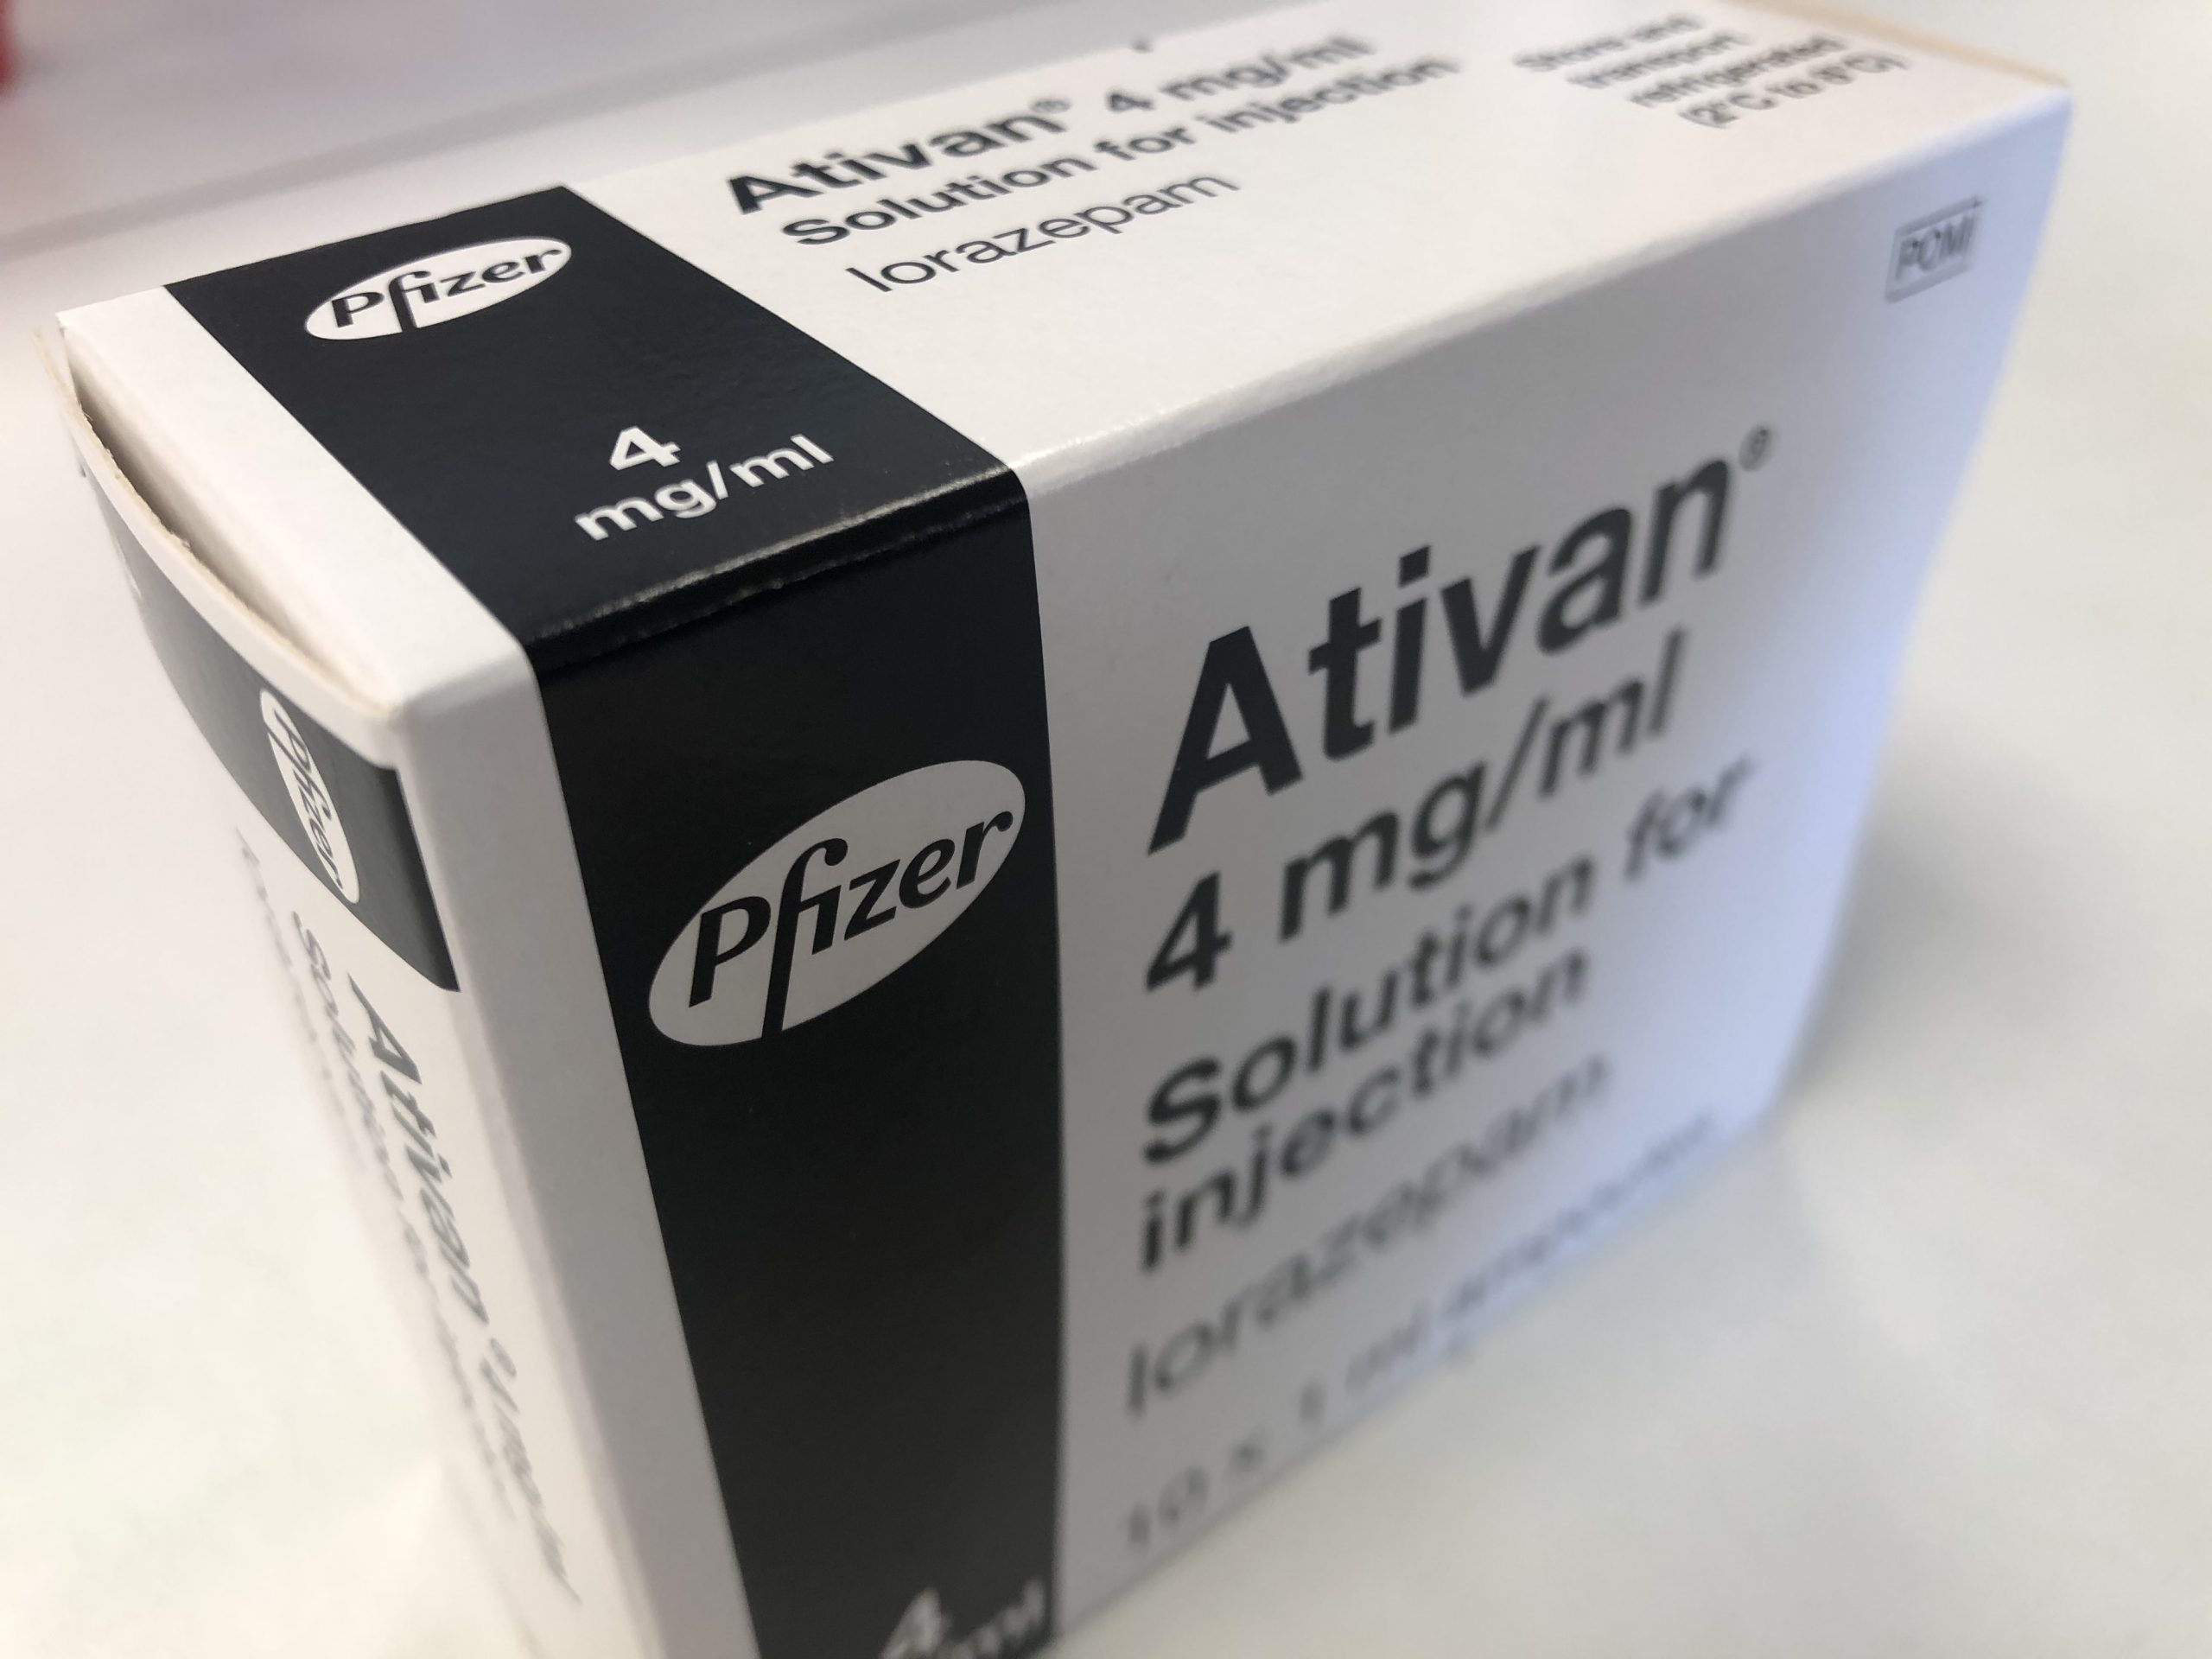 lorazepam-ativan-4mg-ml-injection-now-available-speeds-healthcare